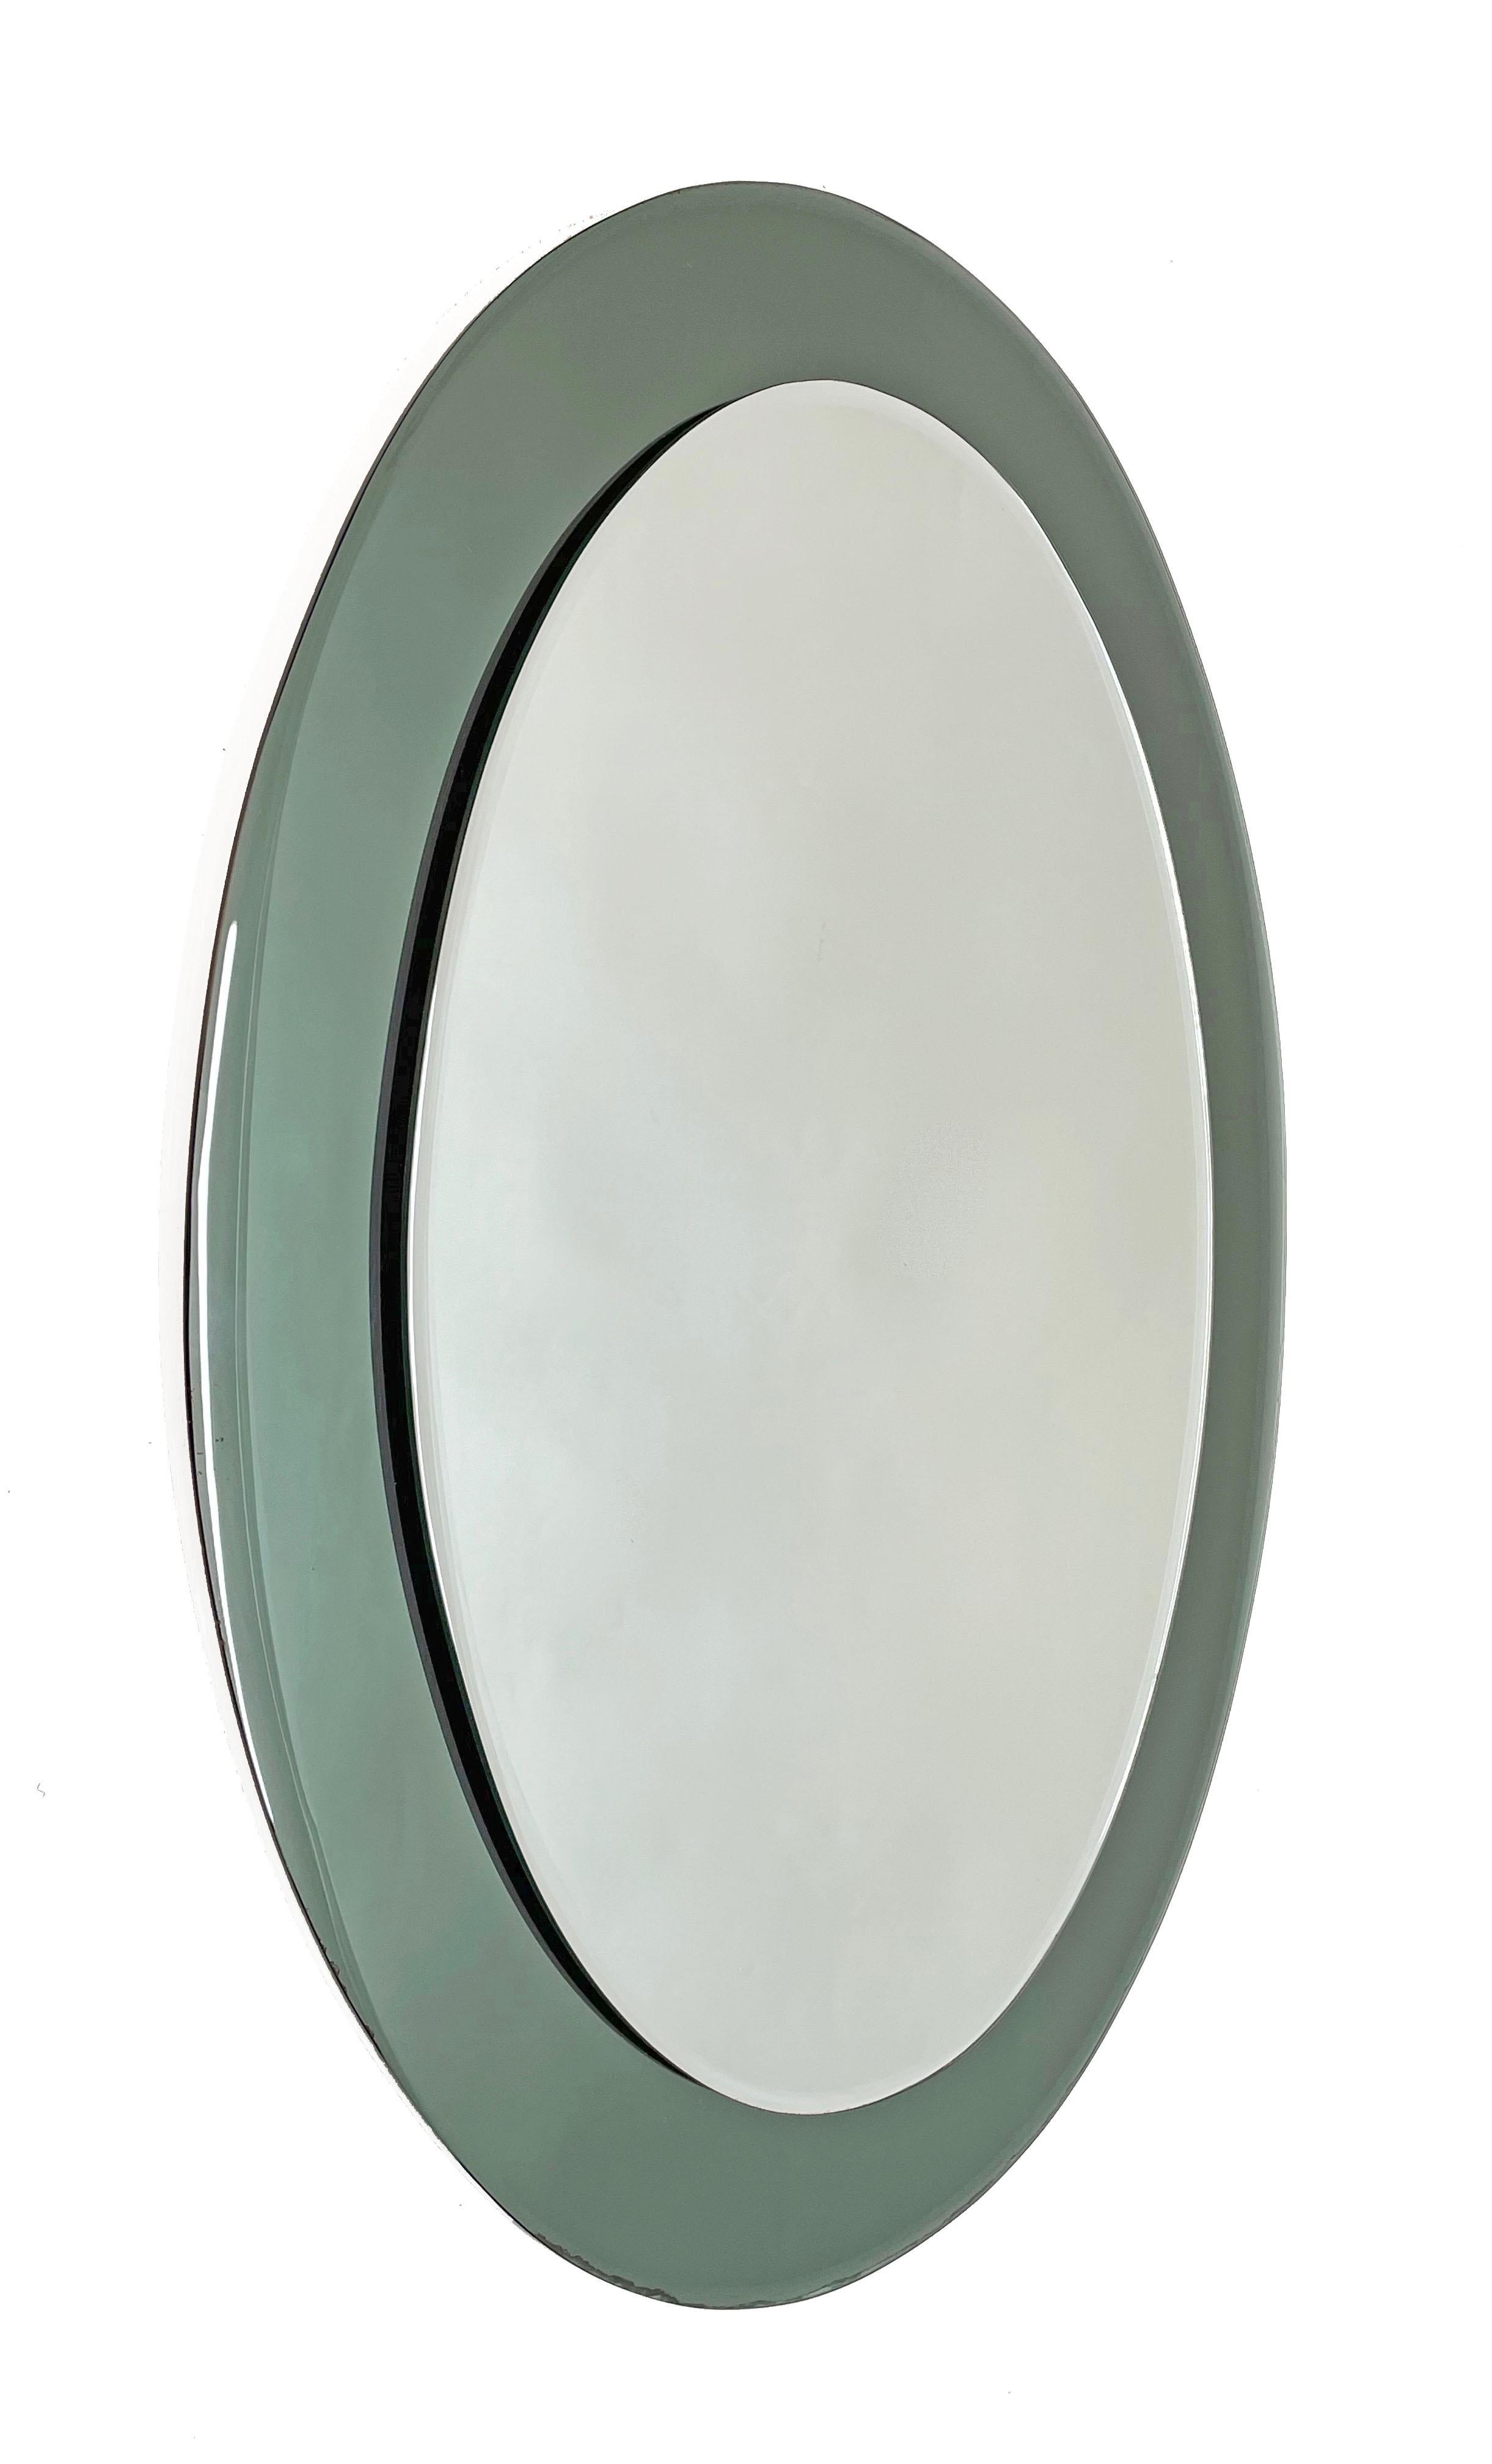 Wonderful midcentury oval wall glass framed mirror. This amazing item was produced in Italy during the 1960s and its design is attributed to Cristal Art.

In its essential, pure midcentury design and lines, it features a smoked green glass frame